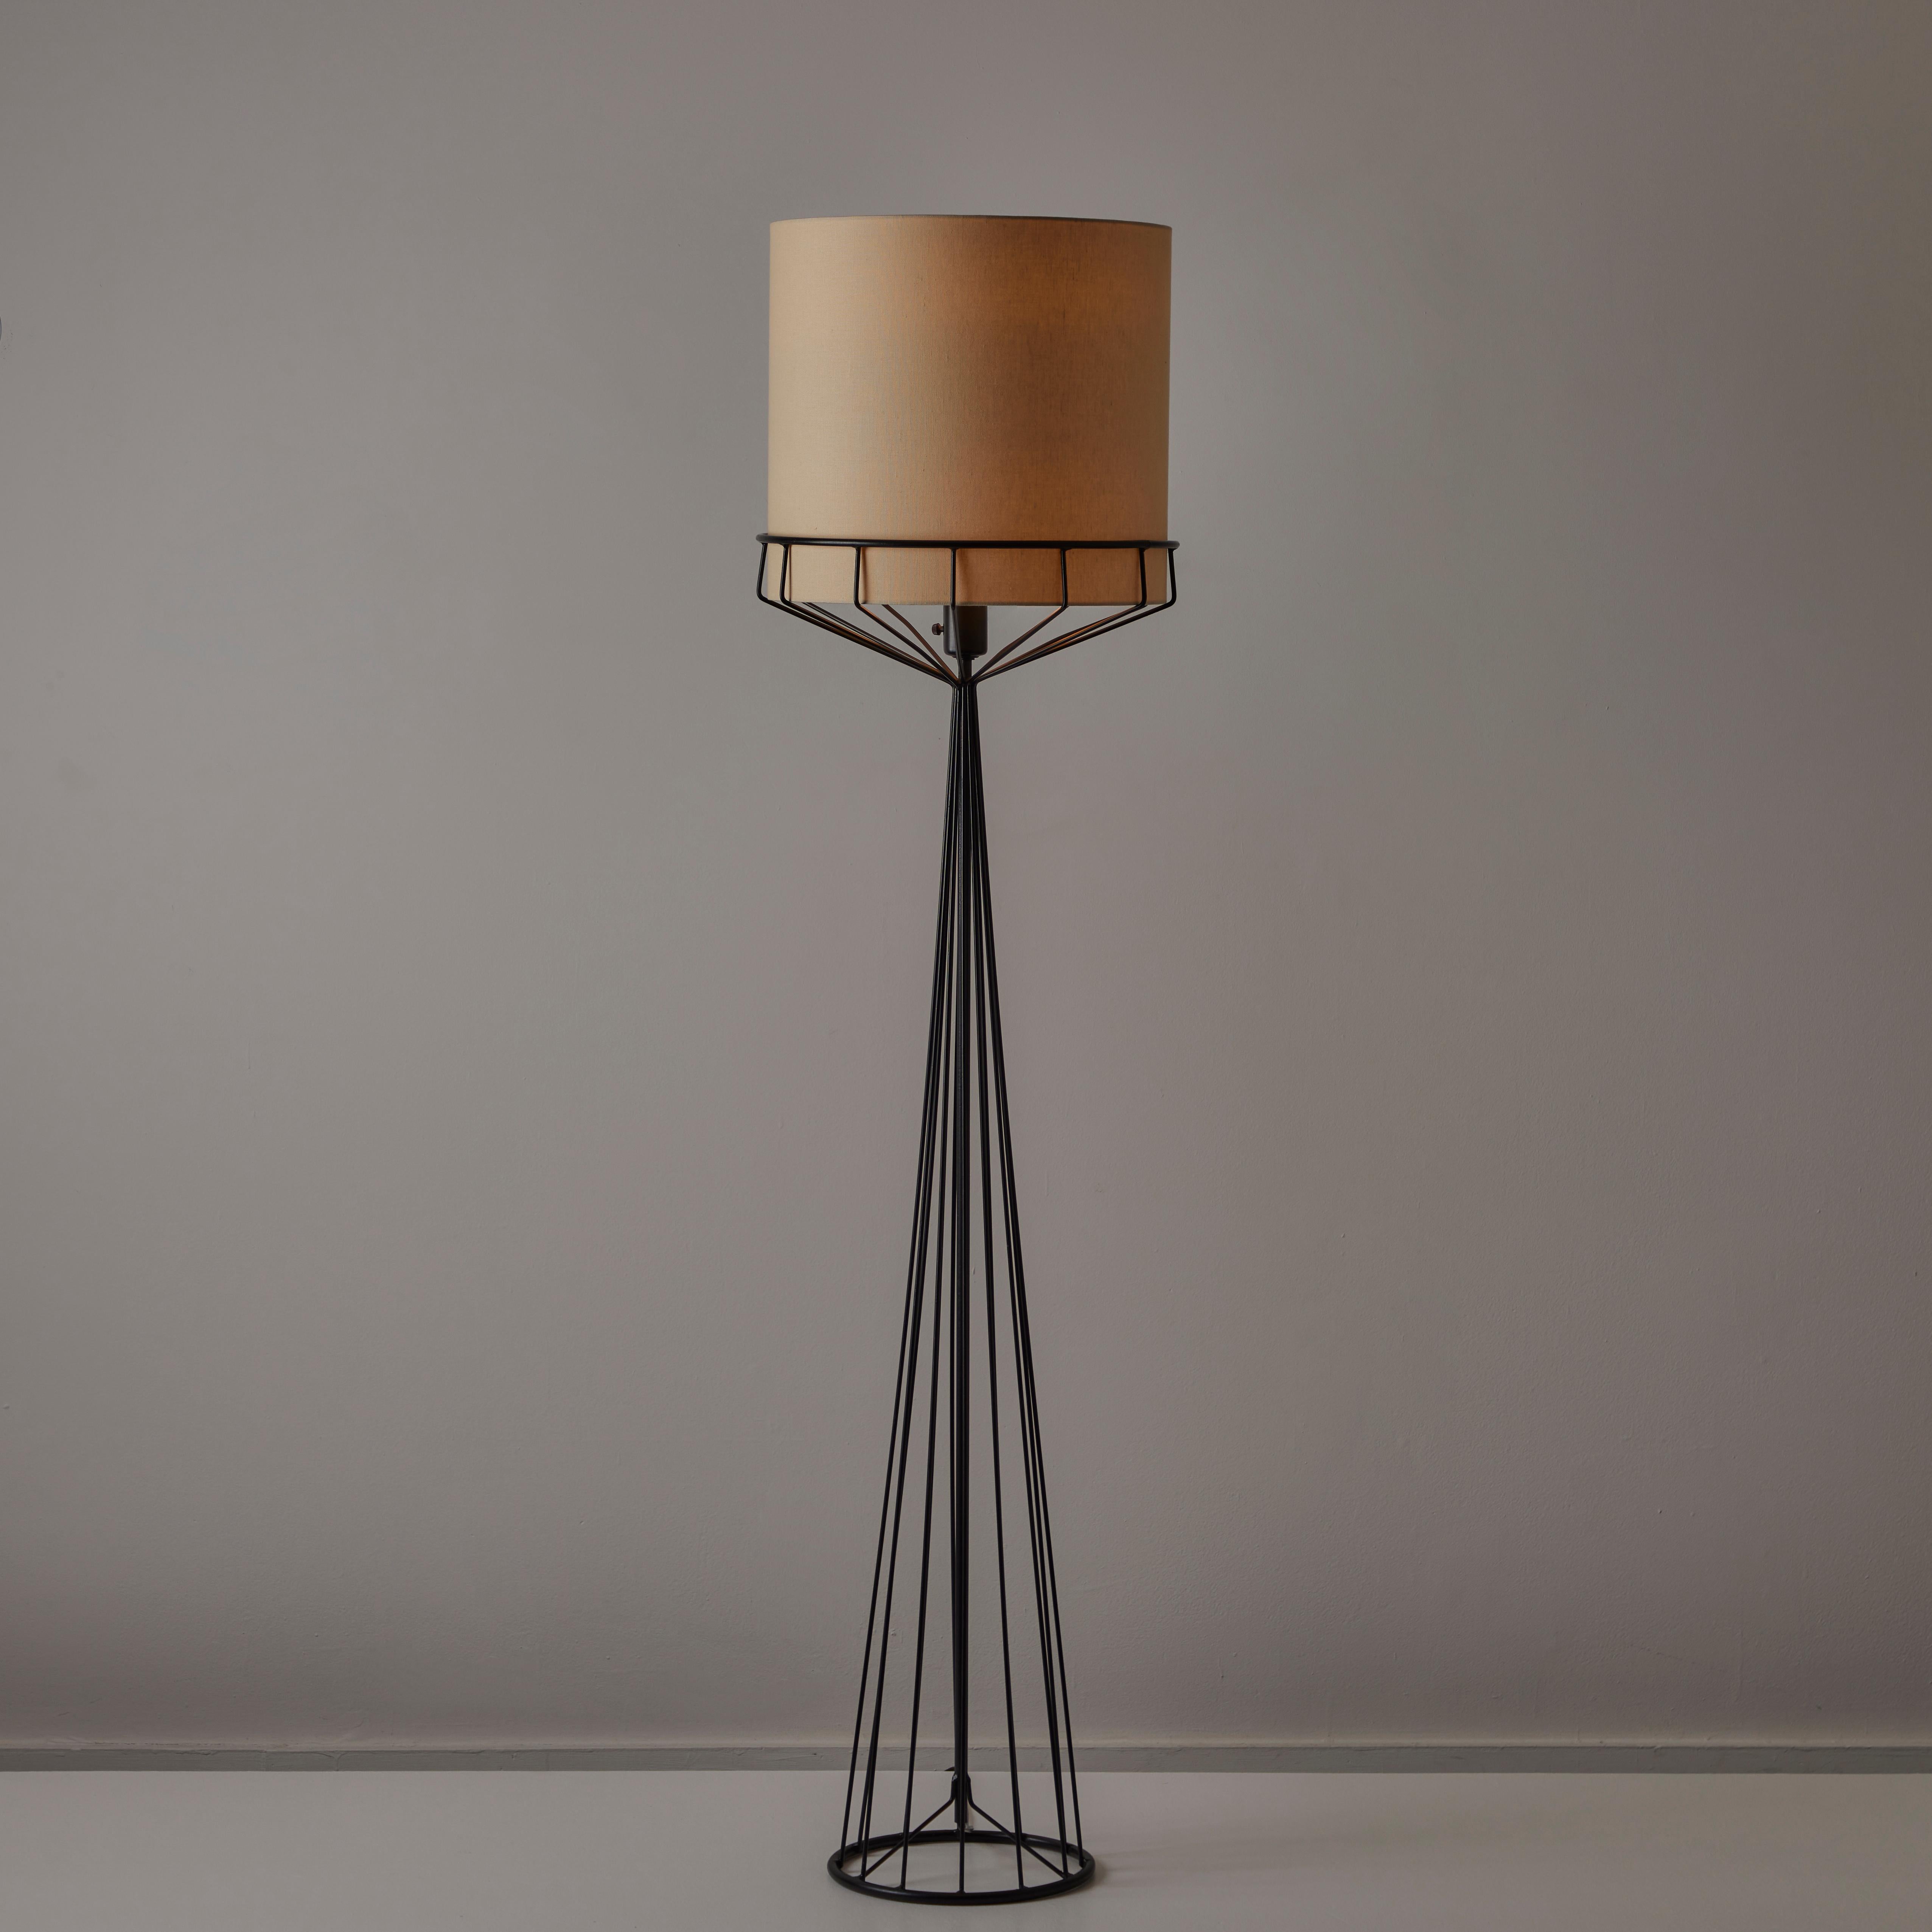 Floor Lamp by Tony Paul for The Elton Company. Designed and manufactured in the USA, in 1959. Multiple steel enameled rods form a cage-like floor lamp base. The top of the stand allows a shade to be nestled at the top. The lamp holds a single E26